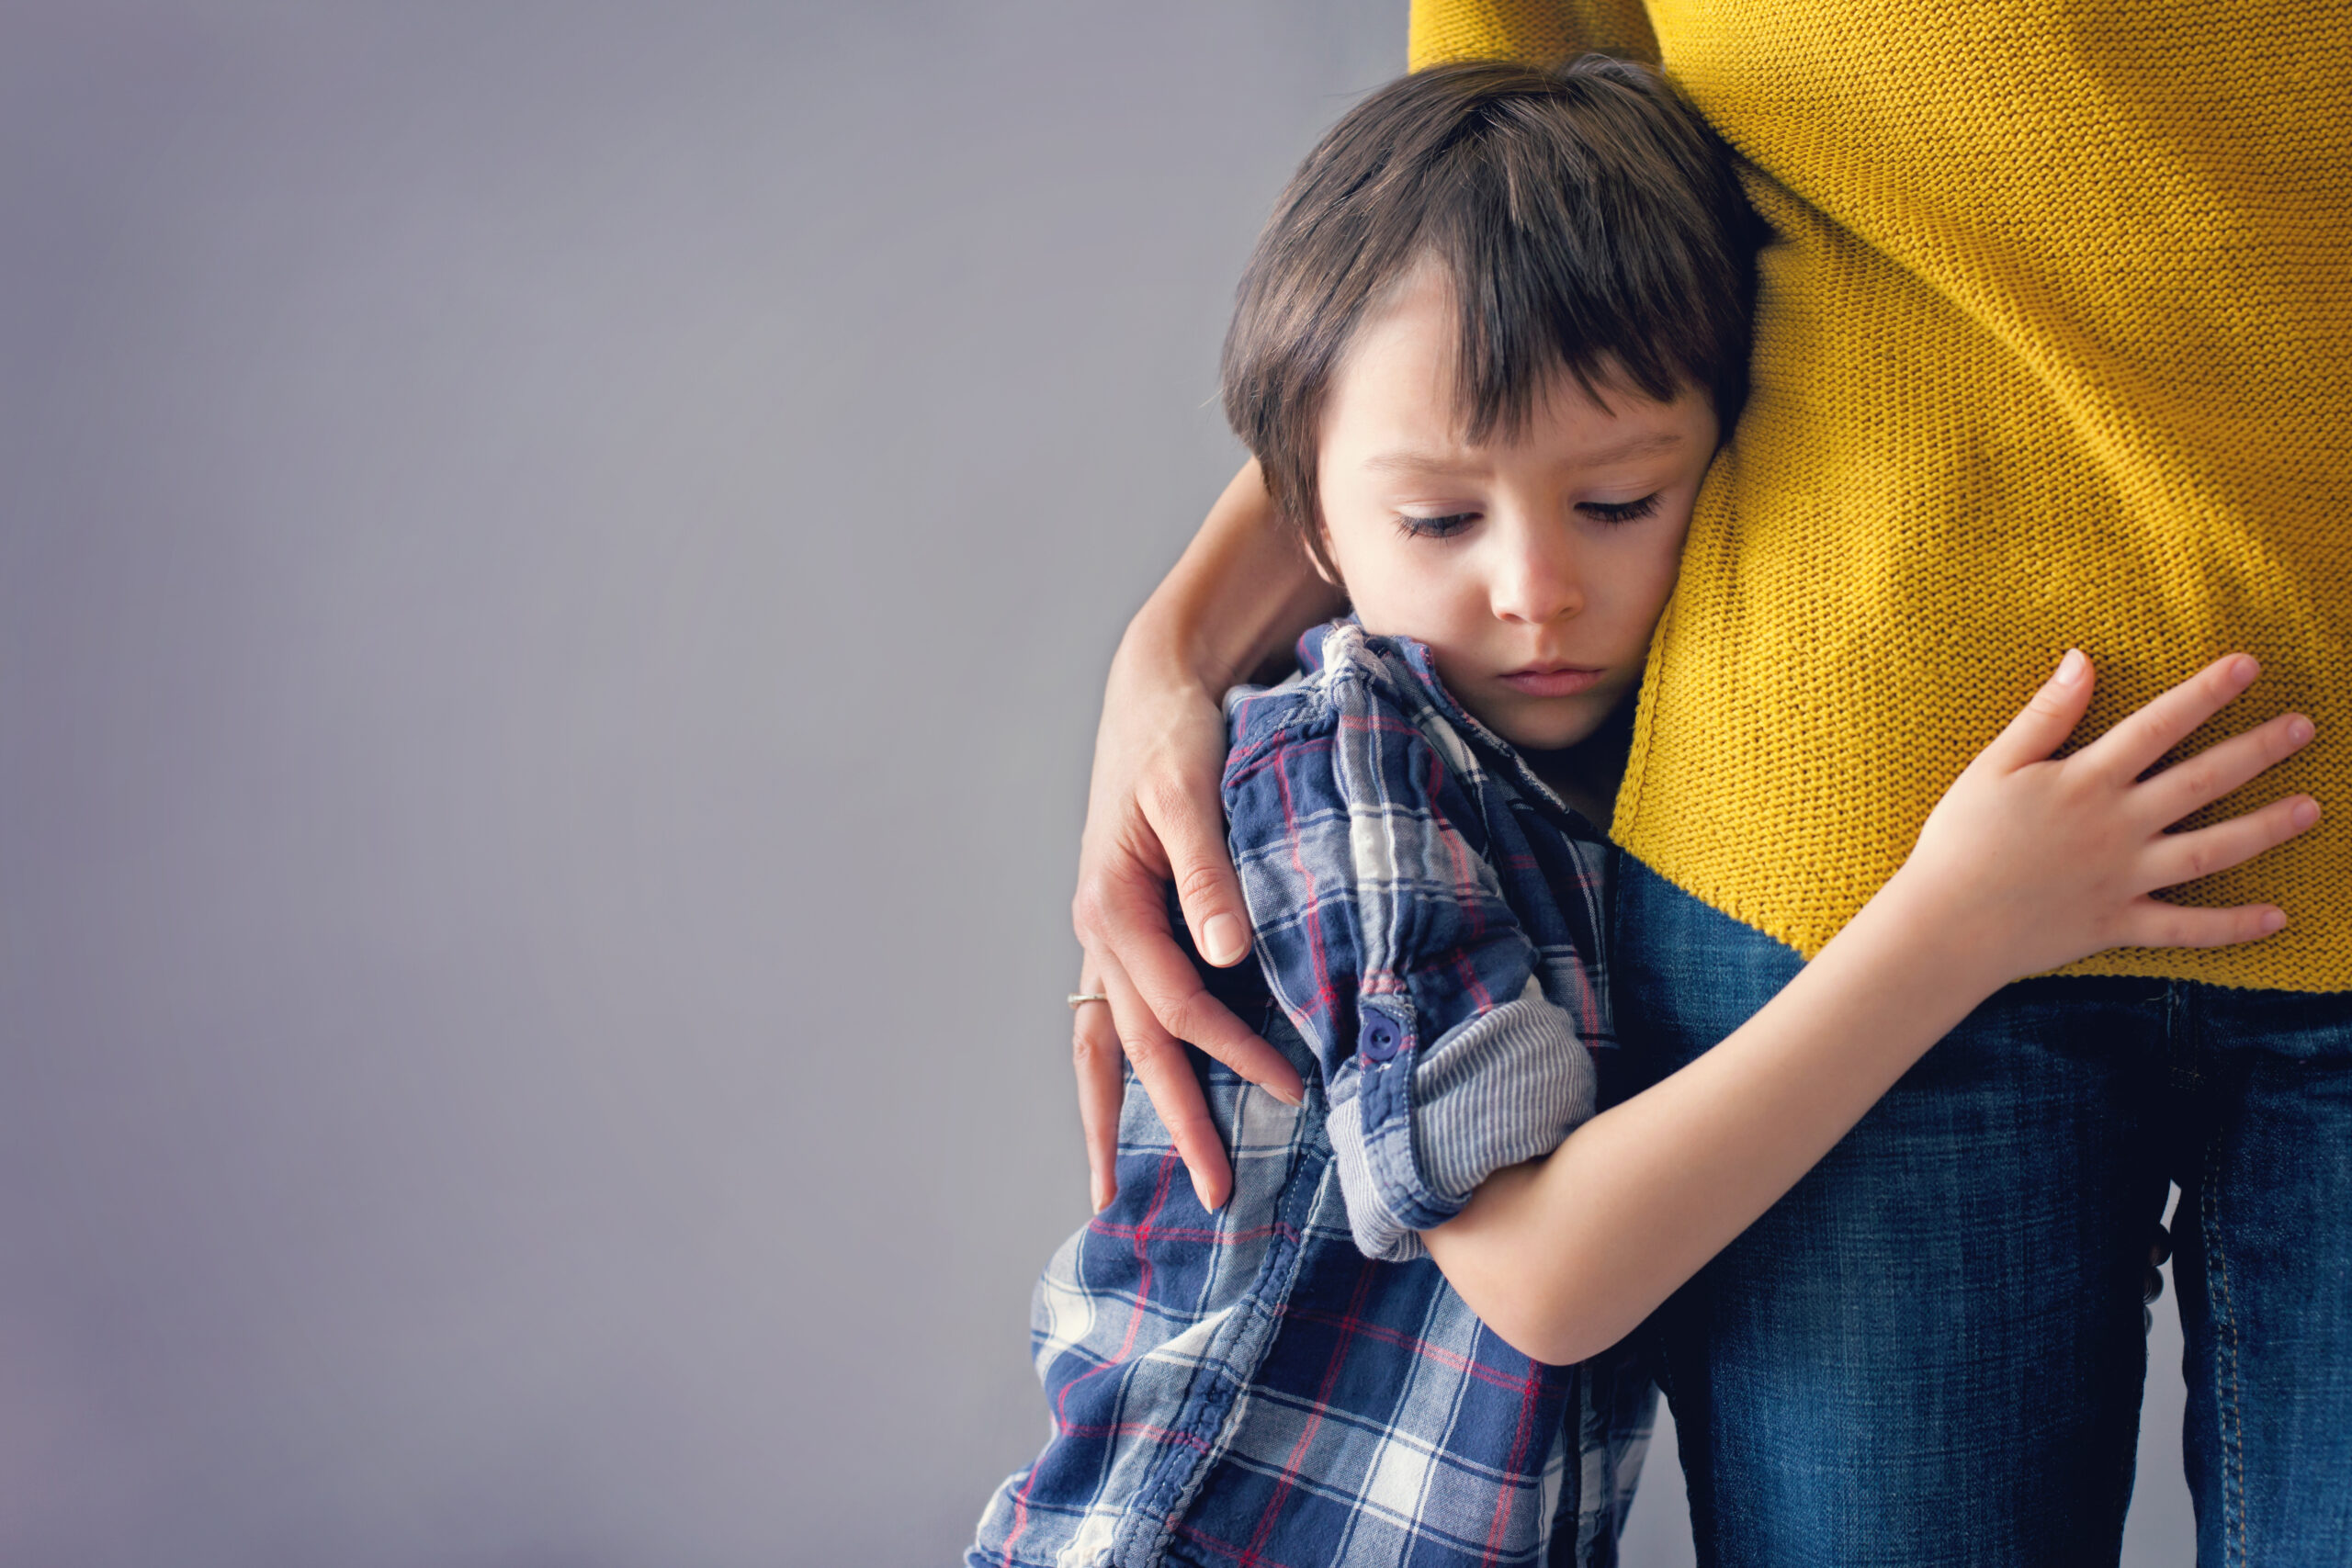 Supporting Children’s Mental Health: Signs and Symptoms to Look for